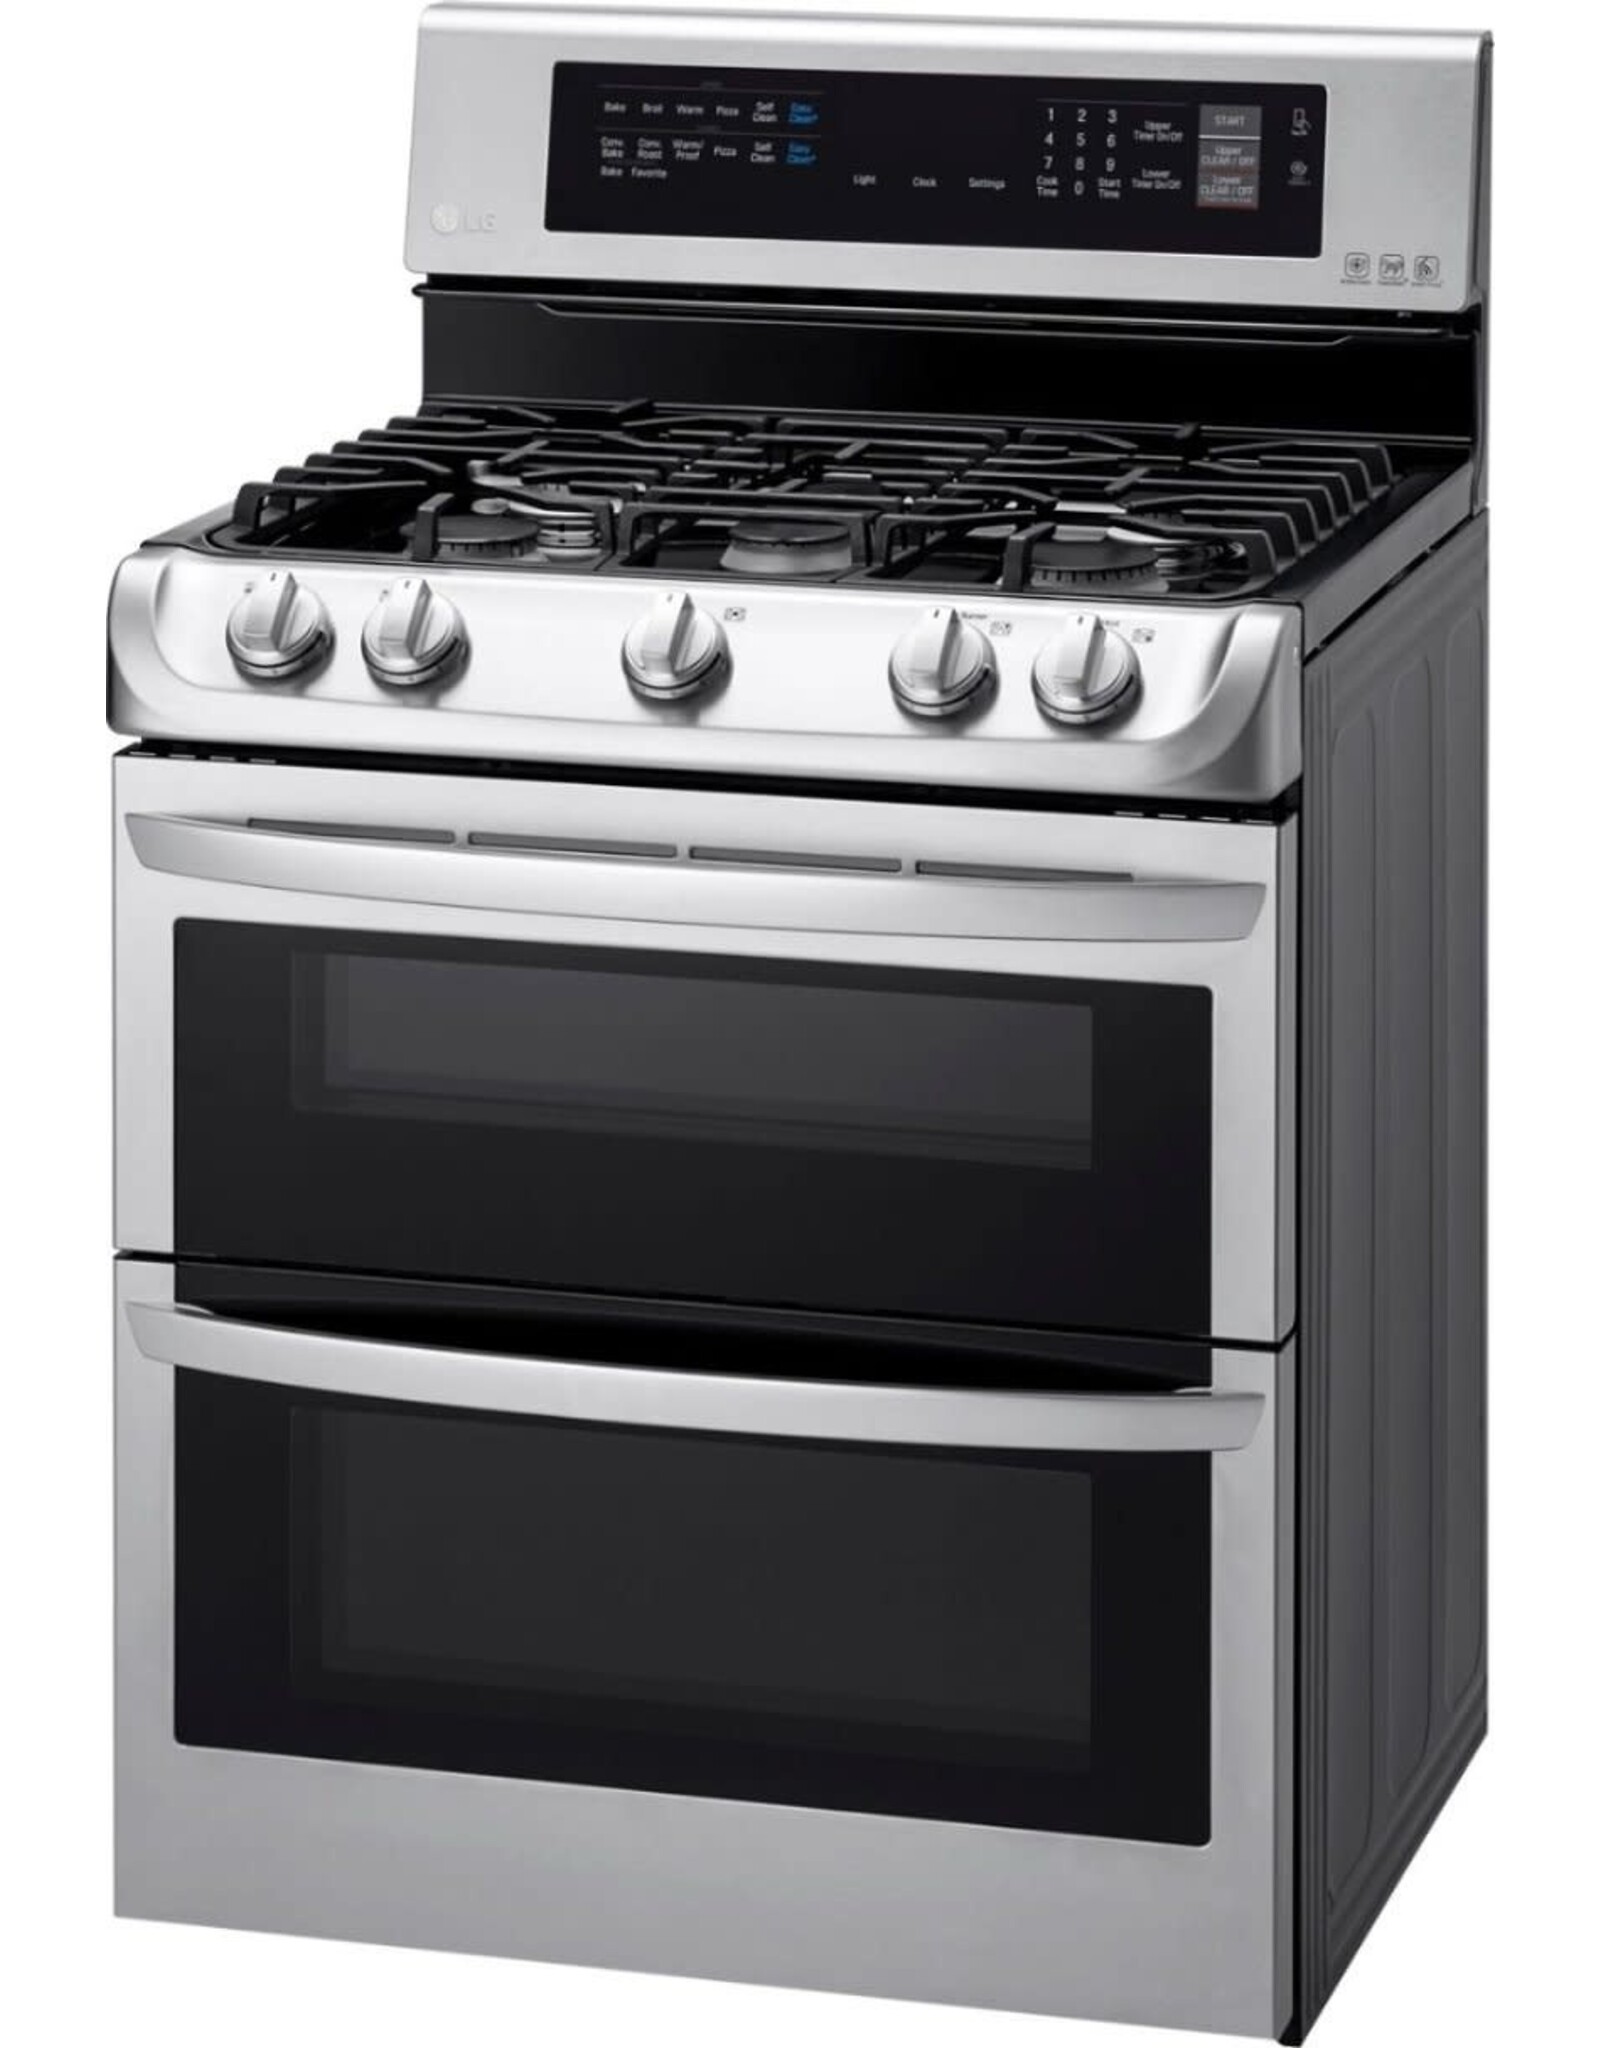 LG Electronics LDG4313ST 6.9 cu. ft. Double Oven Gas Range with ProBake Convection Oven, Self Clean and EasyClean in Stainless Steel